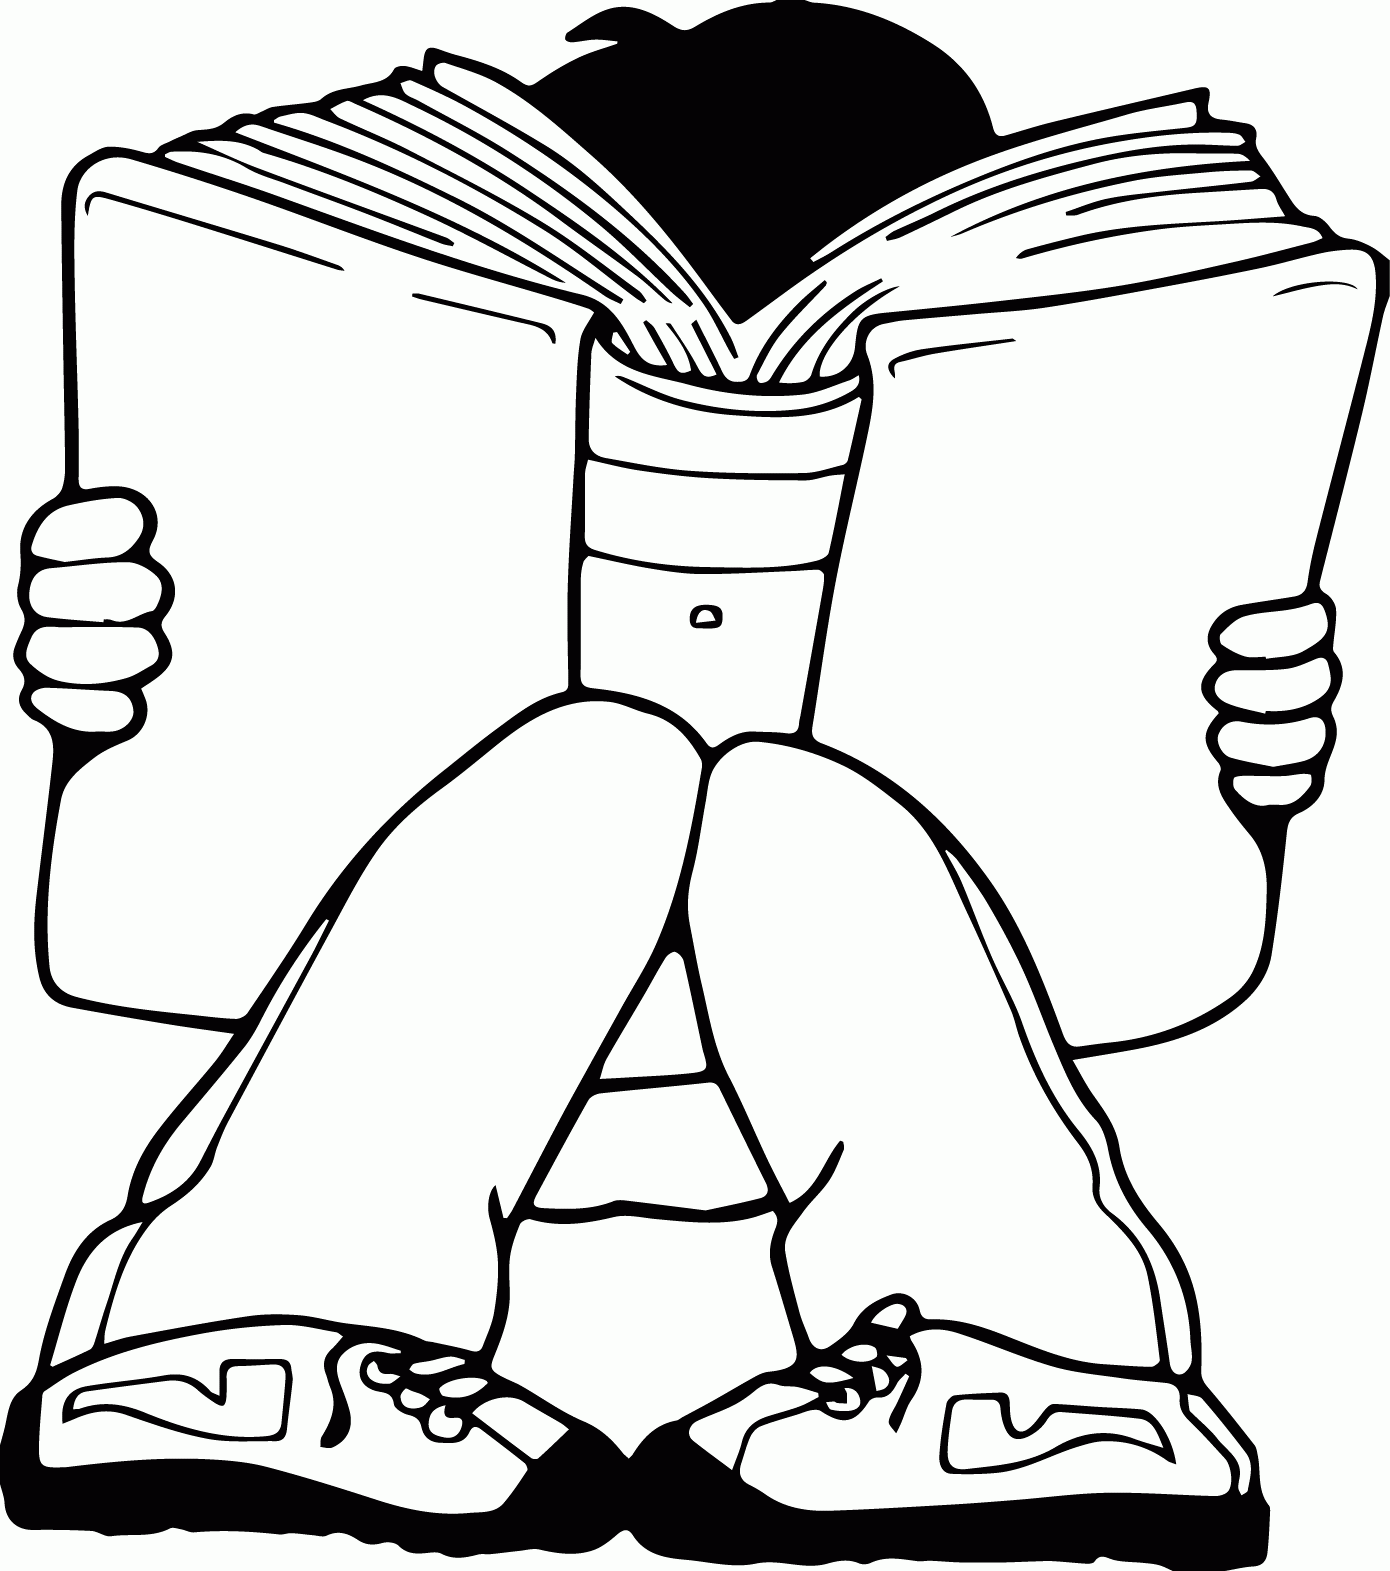 Coloring Pages Of A Book - Coloring